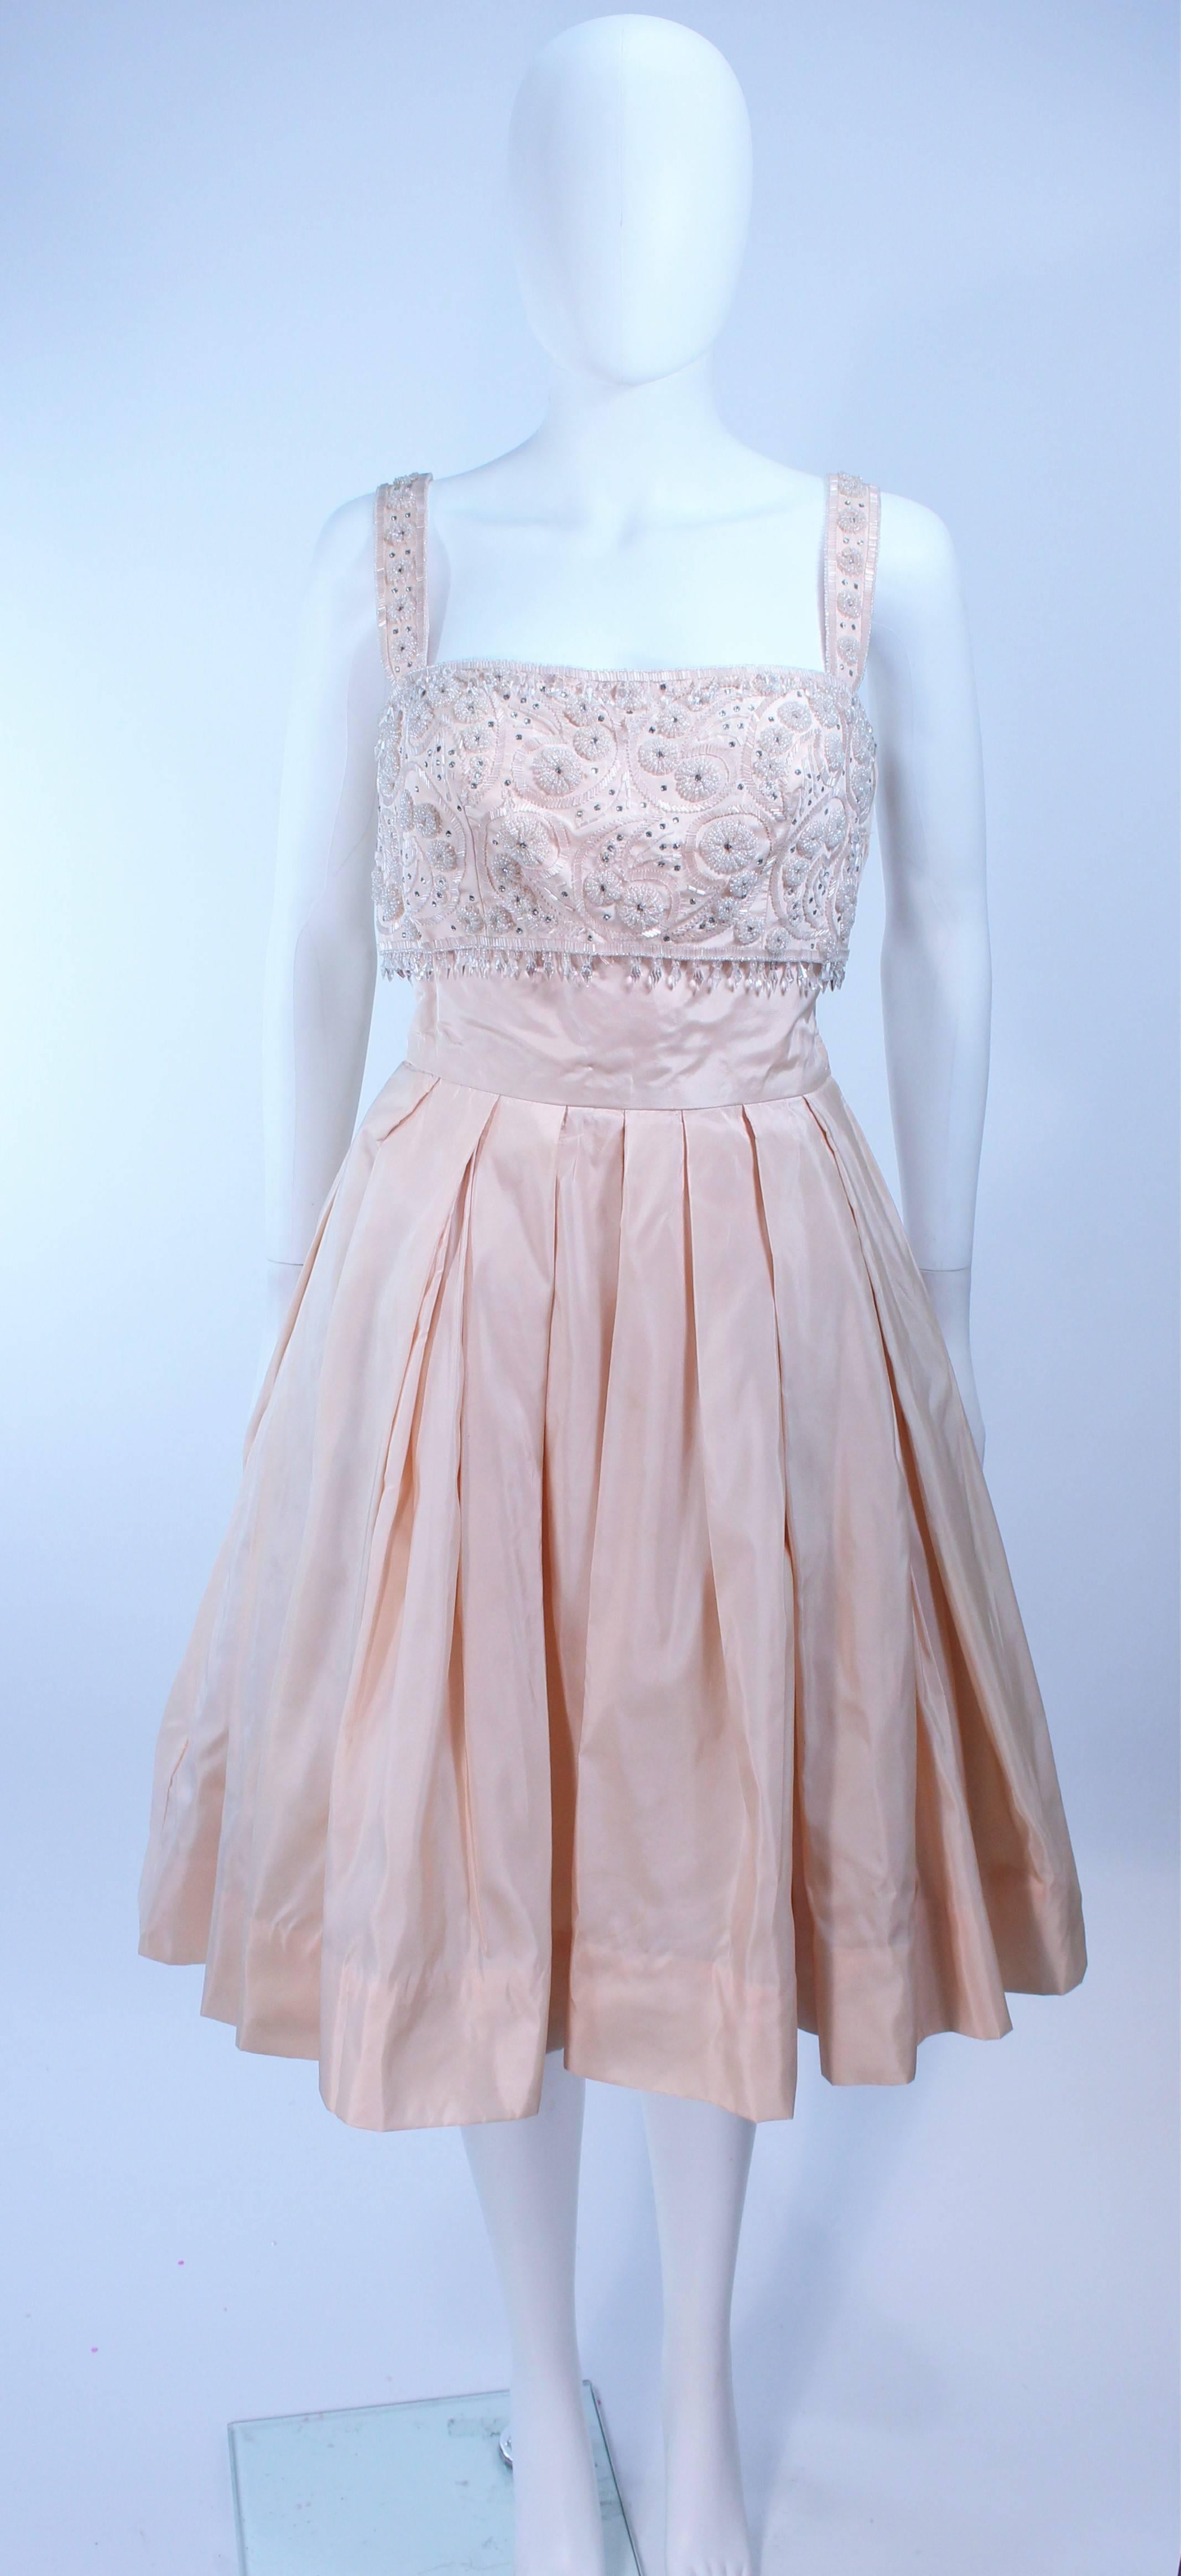 This cocktail dress is composed of a light pink embellished taffeta. Features a side zipper closure with hook and eyes. In great vintage condition, sold 